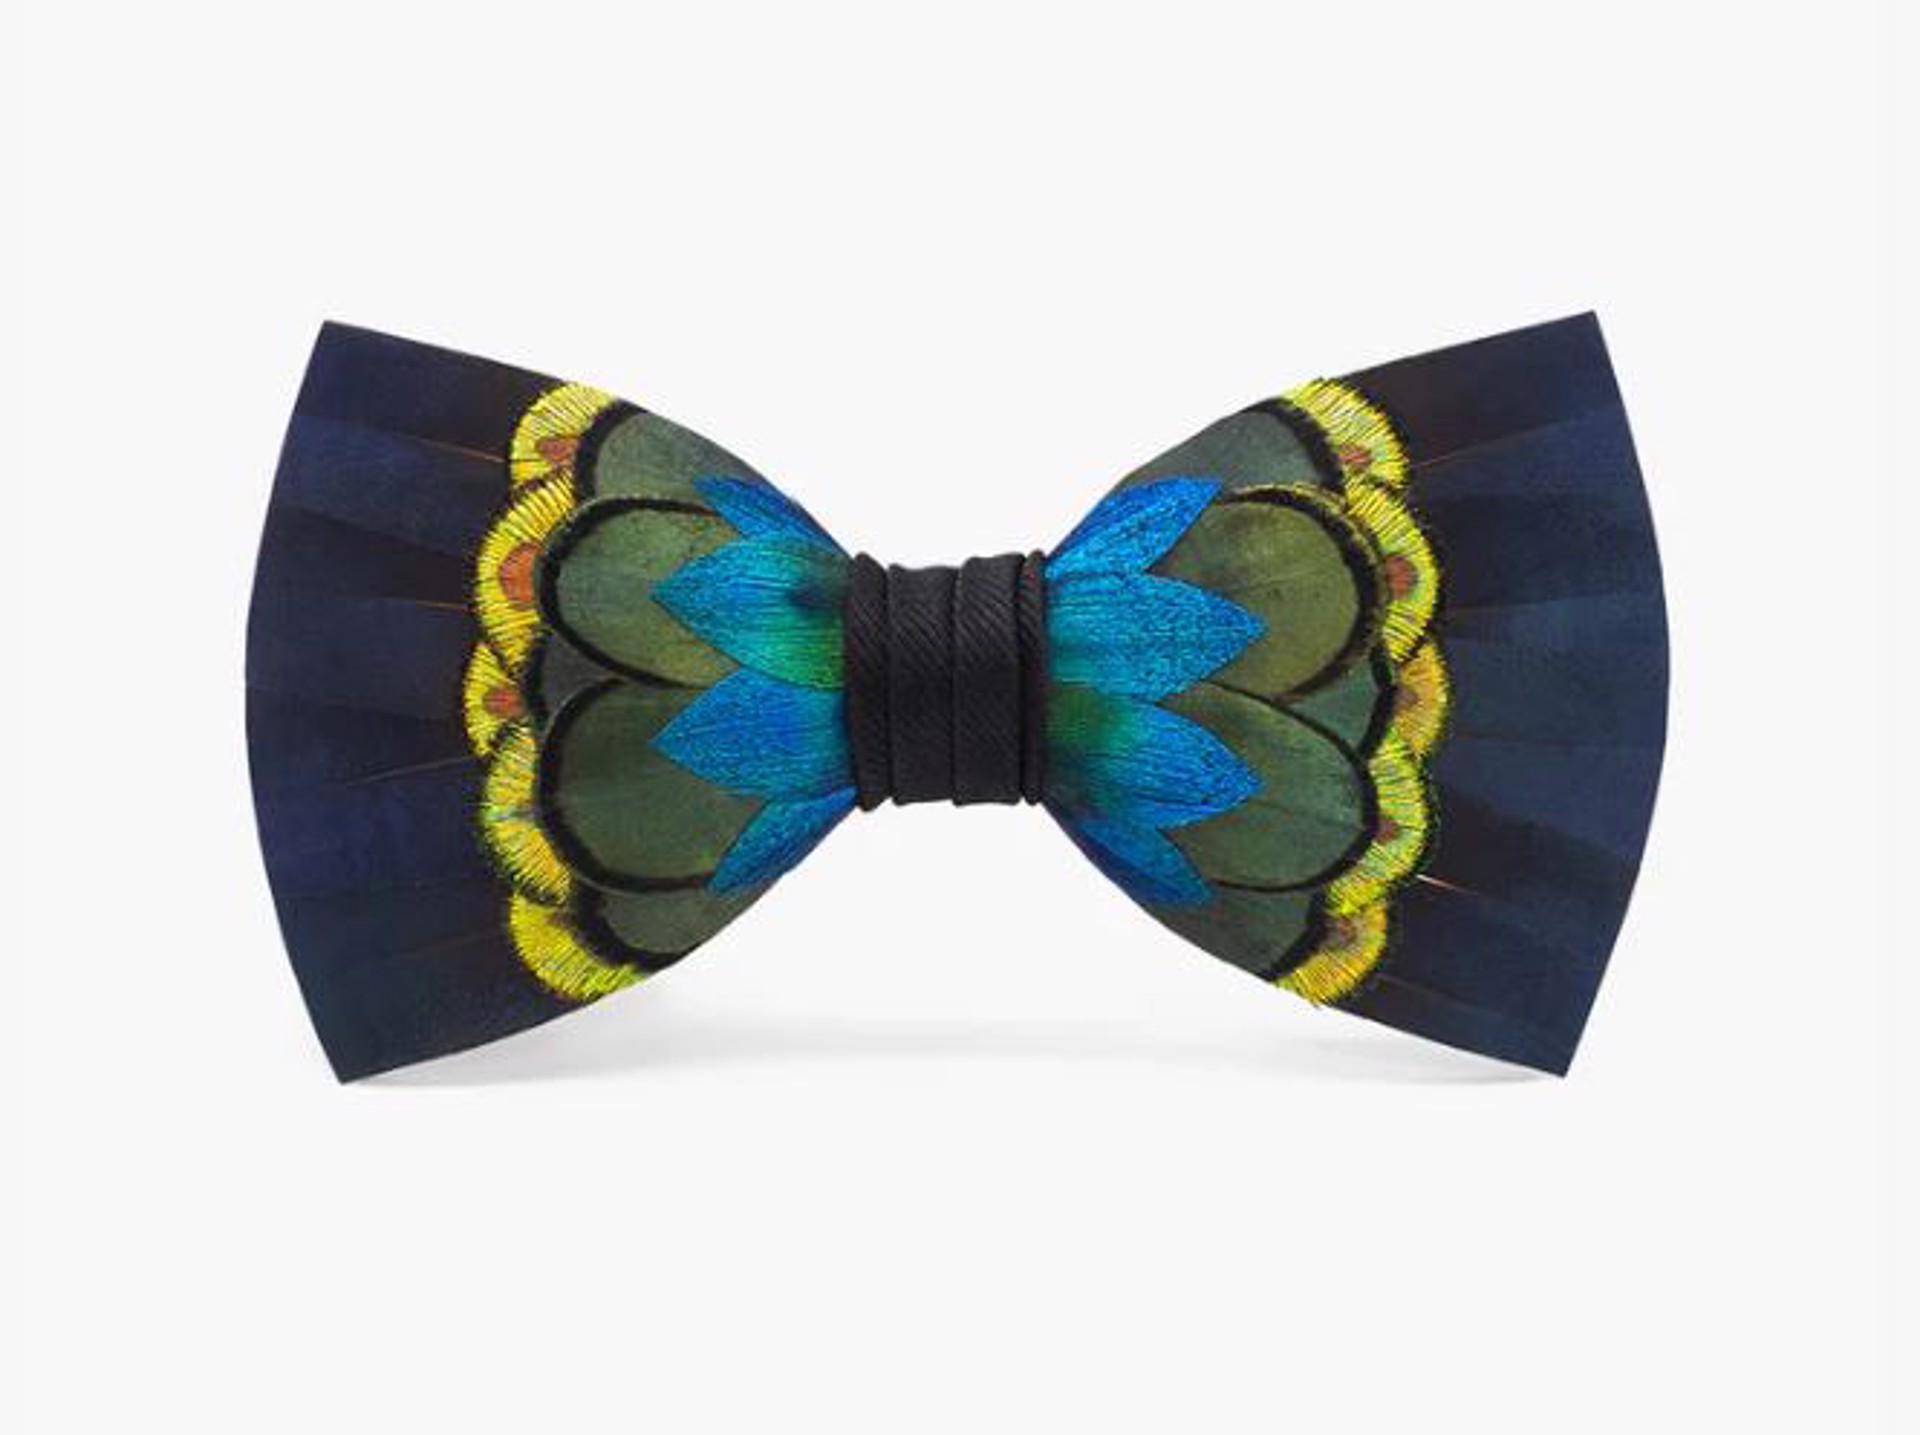 Sitka Bow Tie - Peacock & Pheasant by Brackish